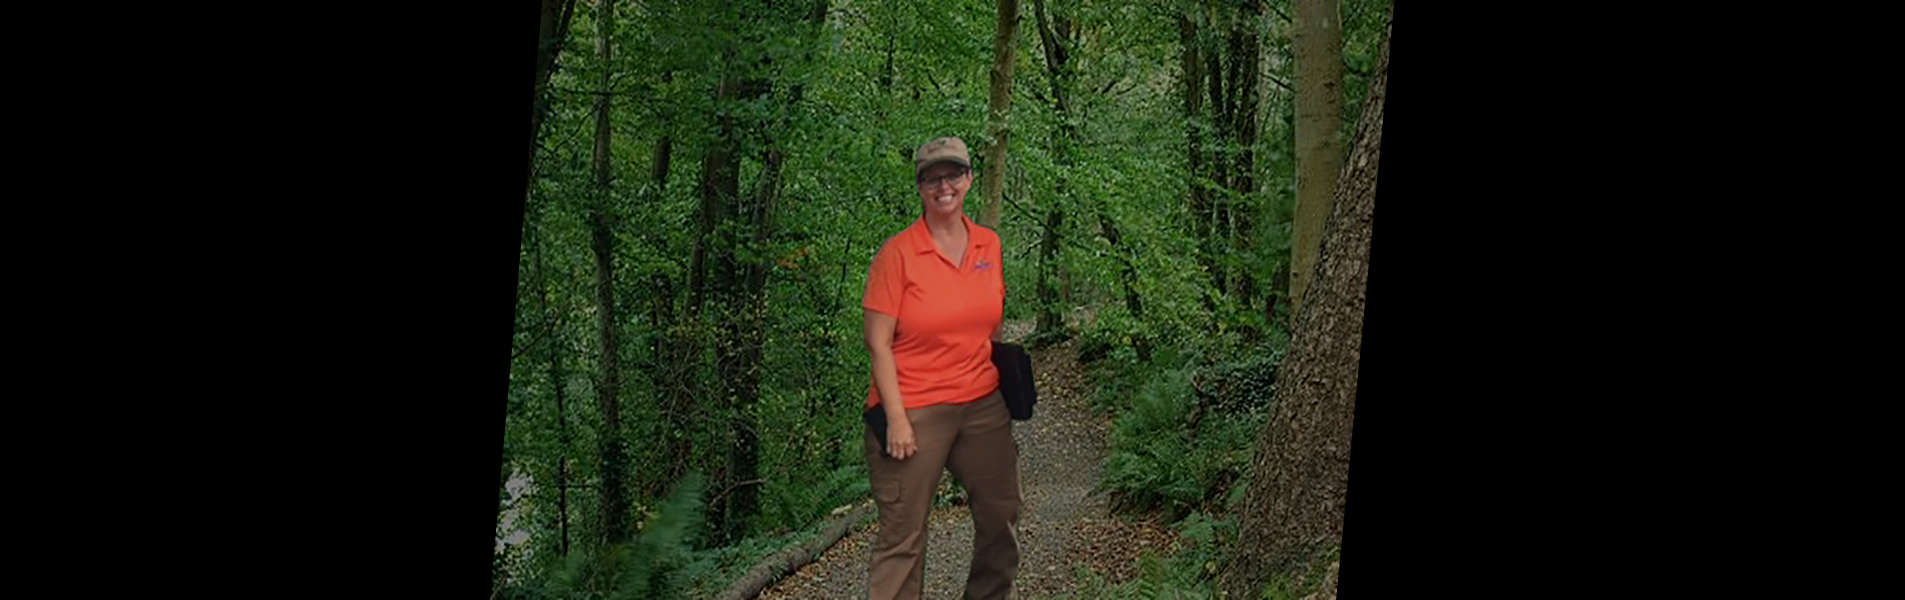 Stephanie Miller outdoors on nature path